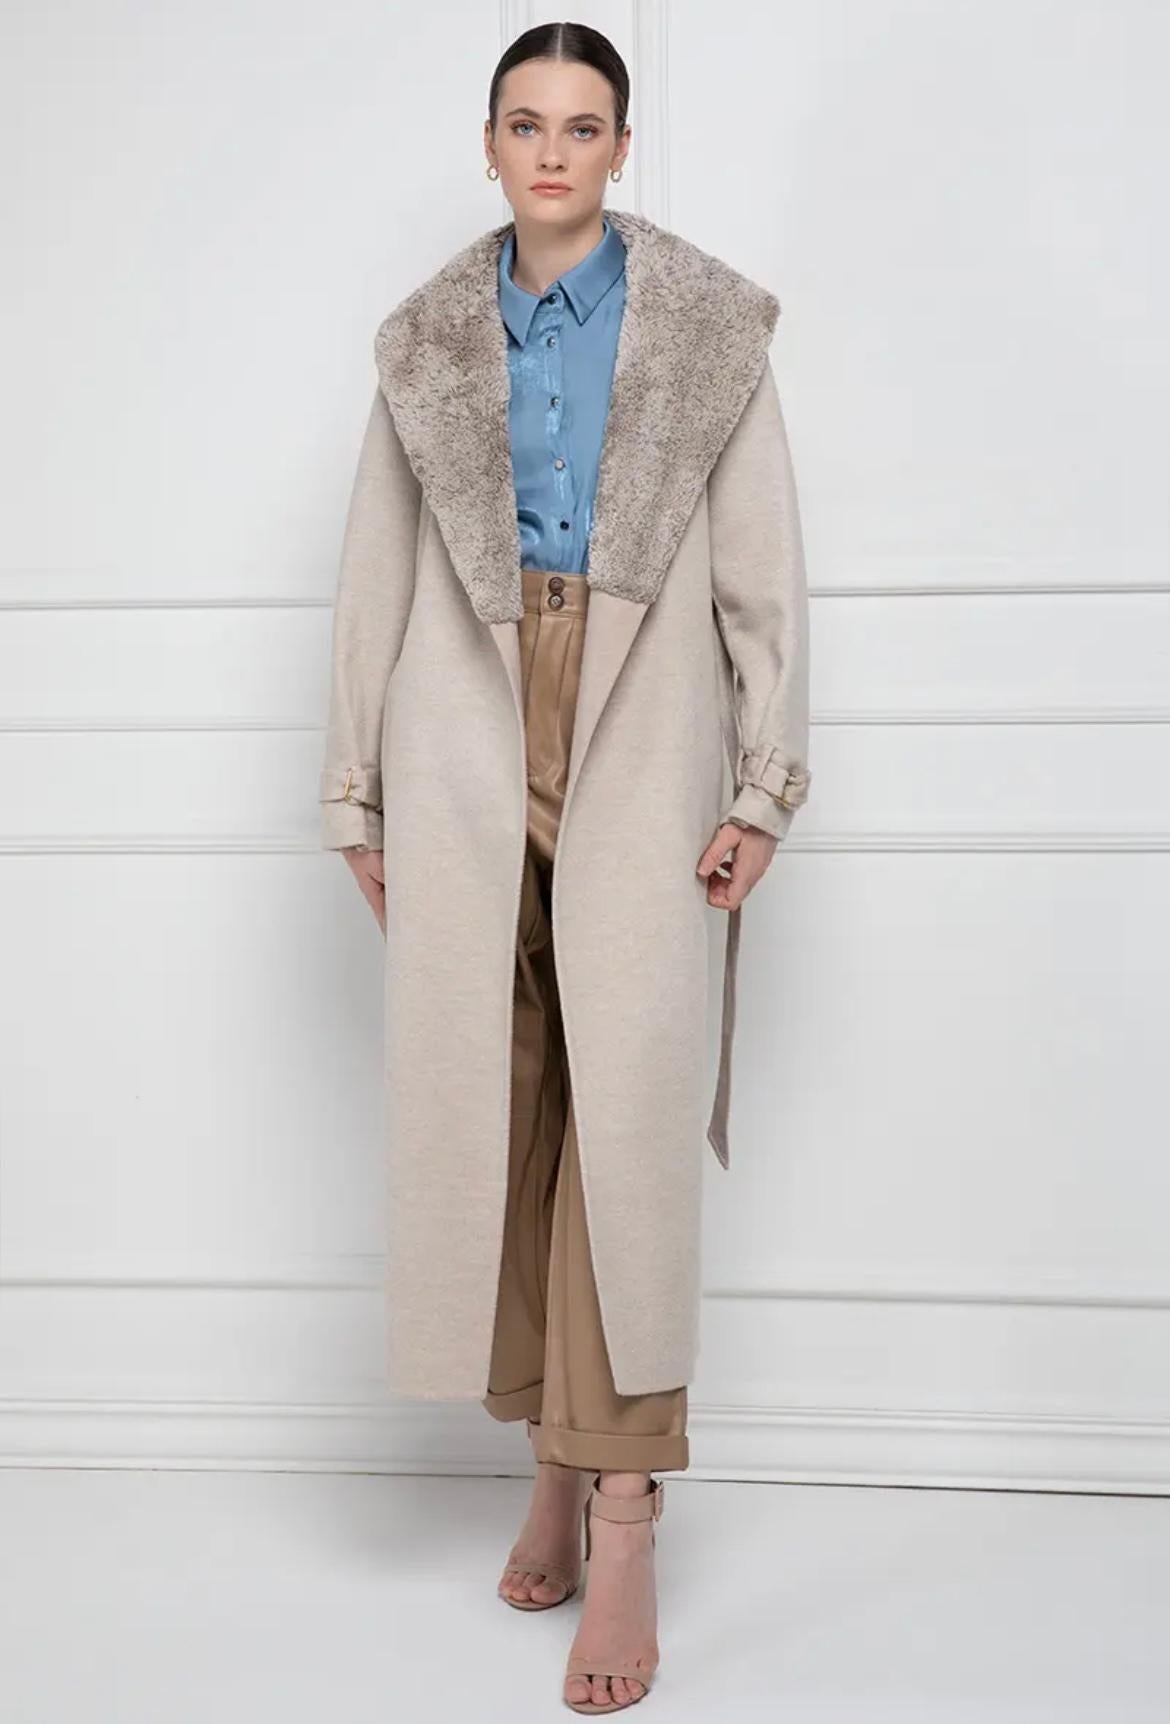 Cashmere Loro Piana with  mink and whole skins. Also this Mink Fur, as the most part of the collection, is made using selected female mink carefully chosen by our laboratories. The type of  mink fur used for this natural mink jacket is Danish,